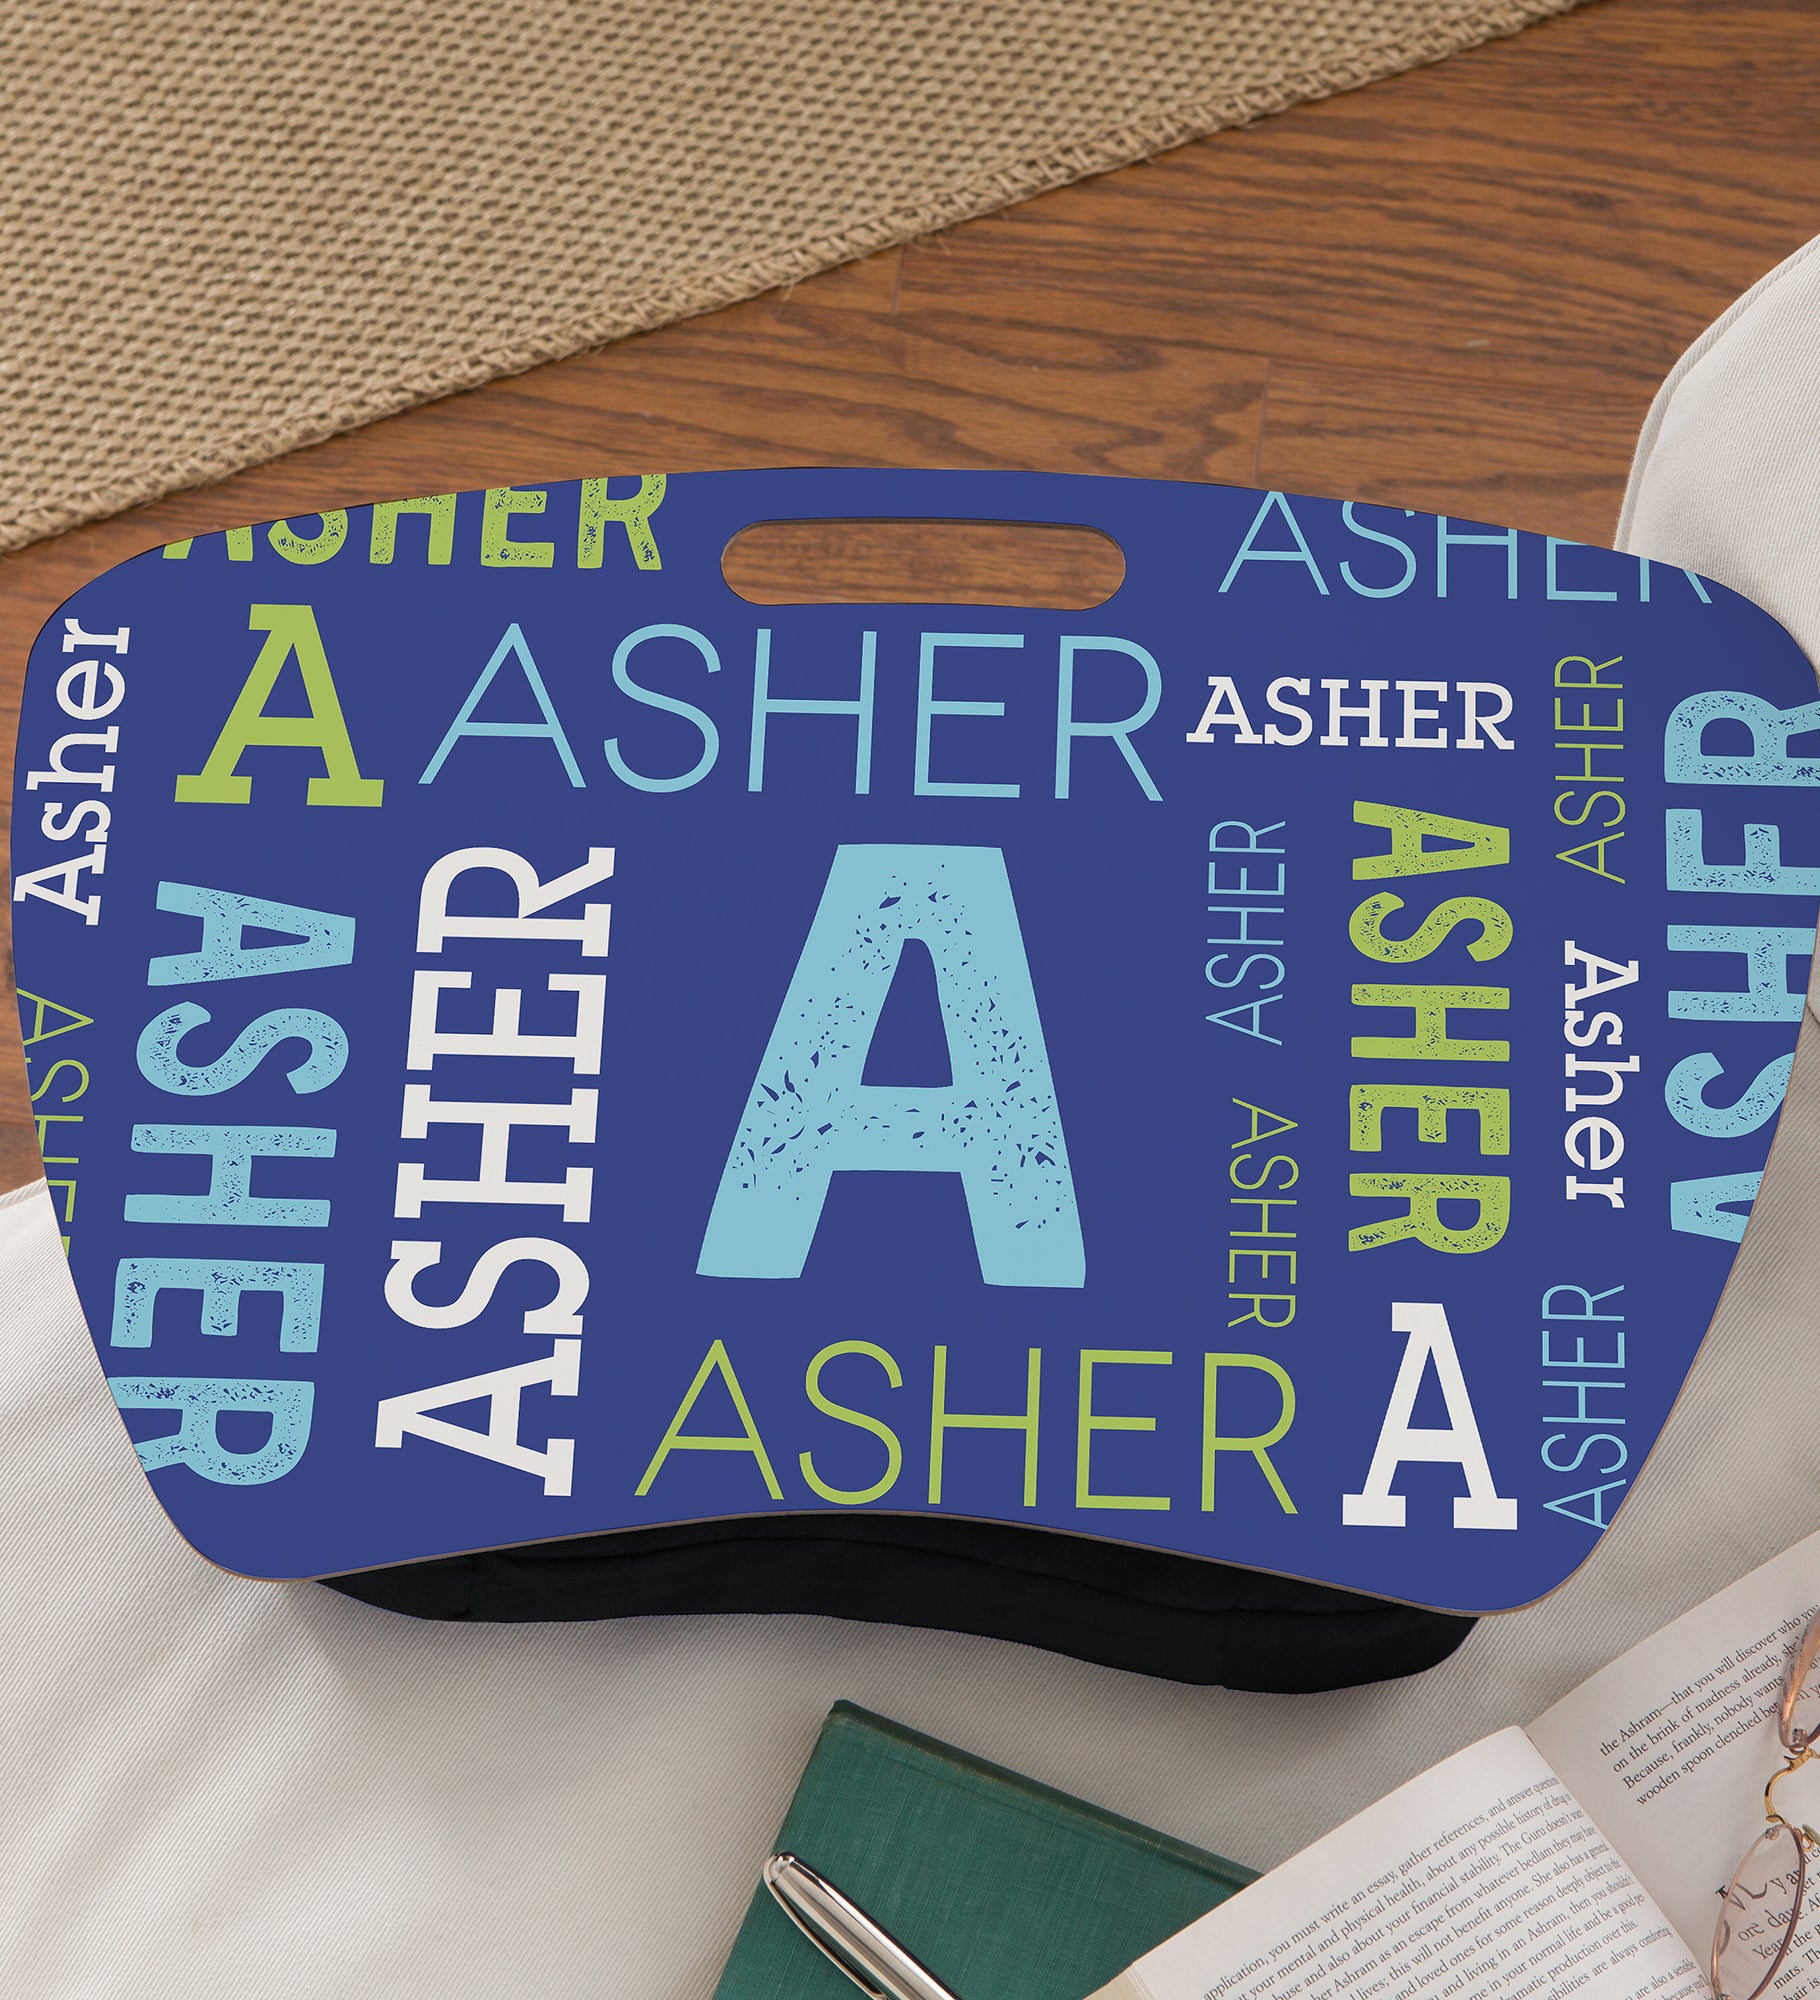 Repeating Name Personalized Lap Desk